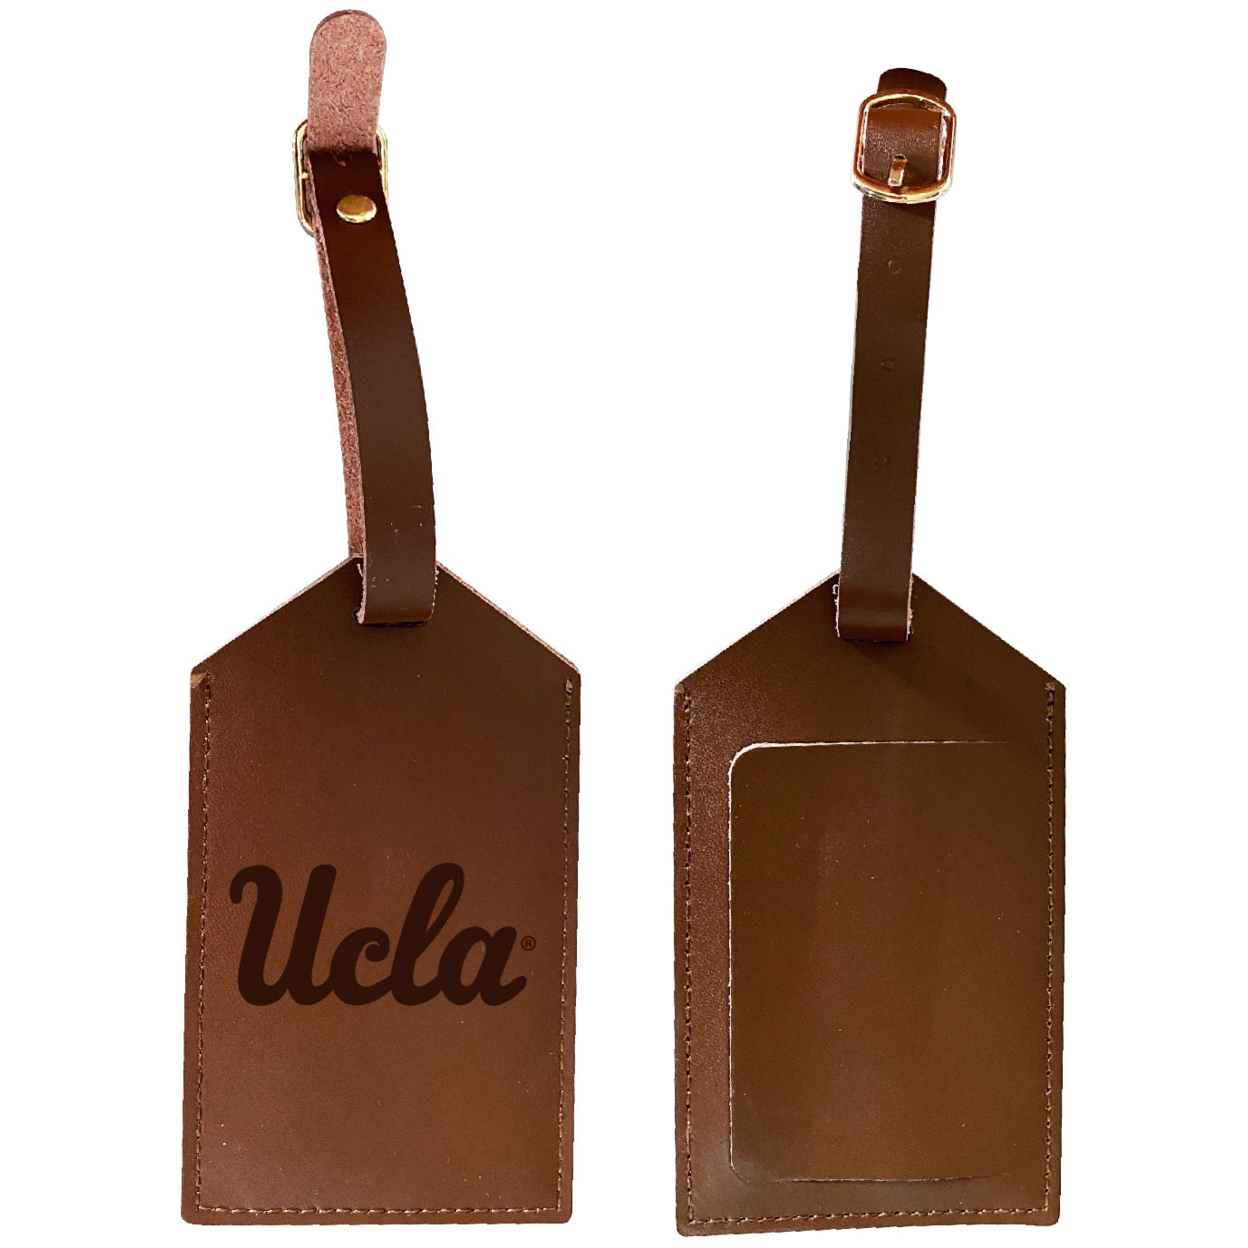 UCLA Bruins Leather Luggage Tag Engraved